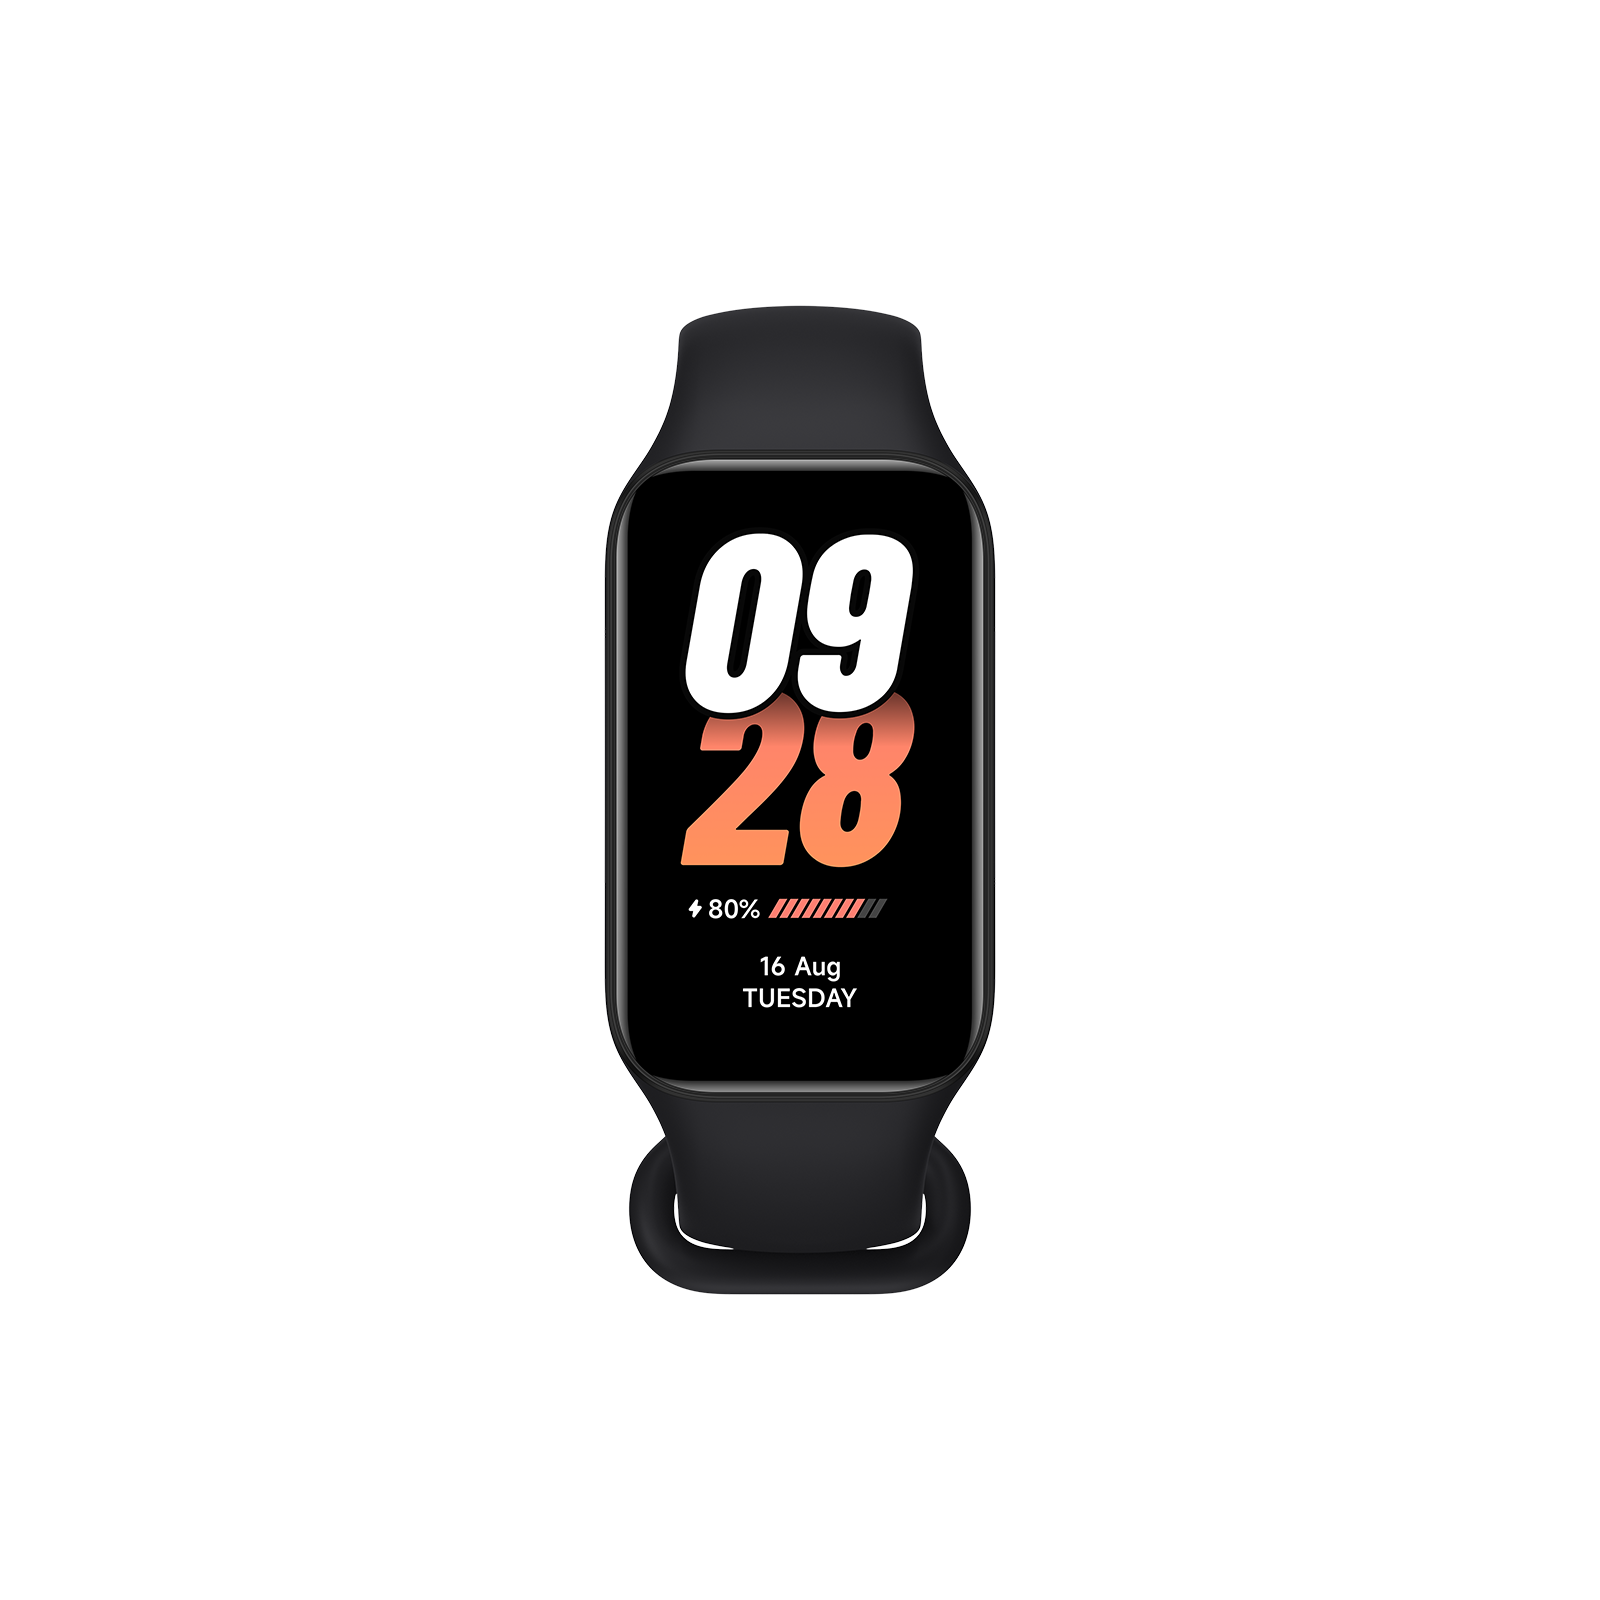 Xiaomi Watch S1 to launch within the next few months, launches scheduled in  Europe and Asia Pacific countries - News, xiaomi watch - burgosandbrein.com